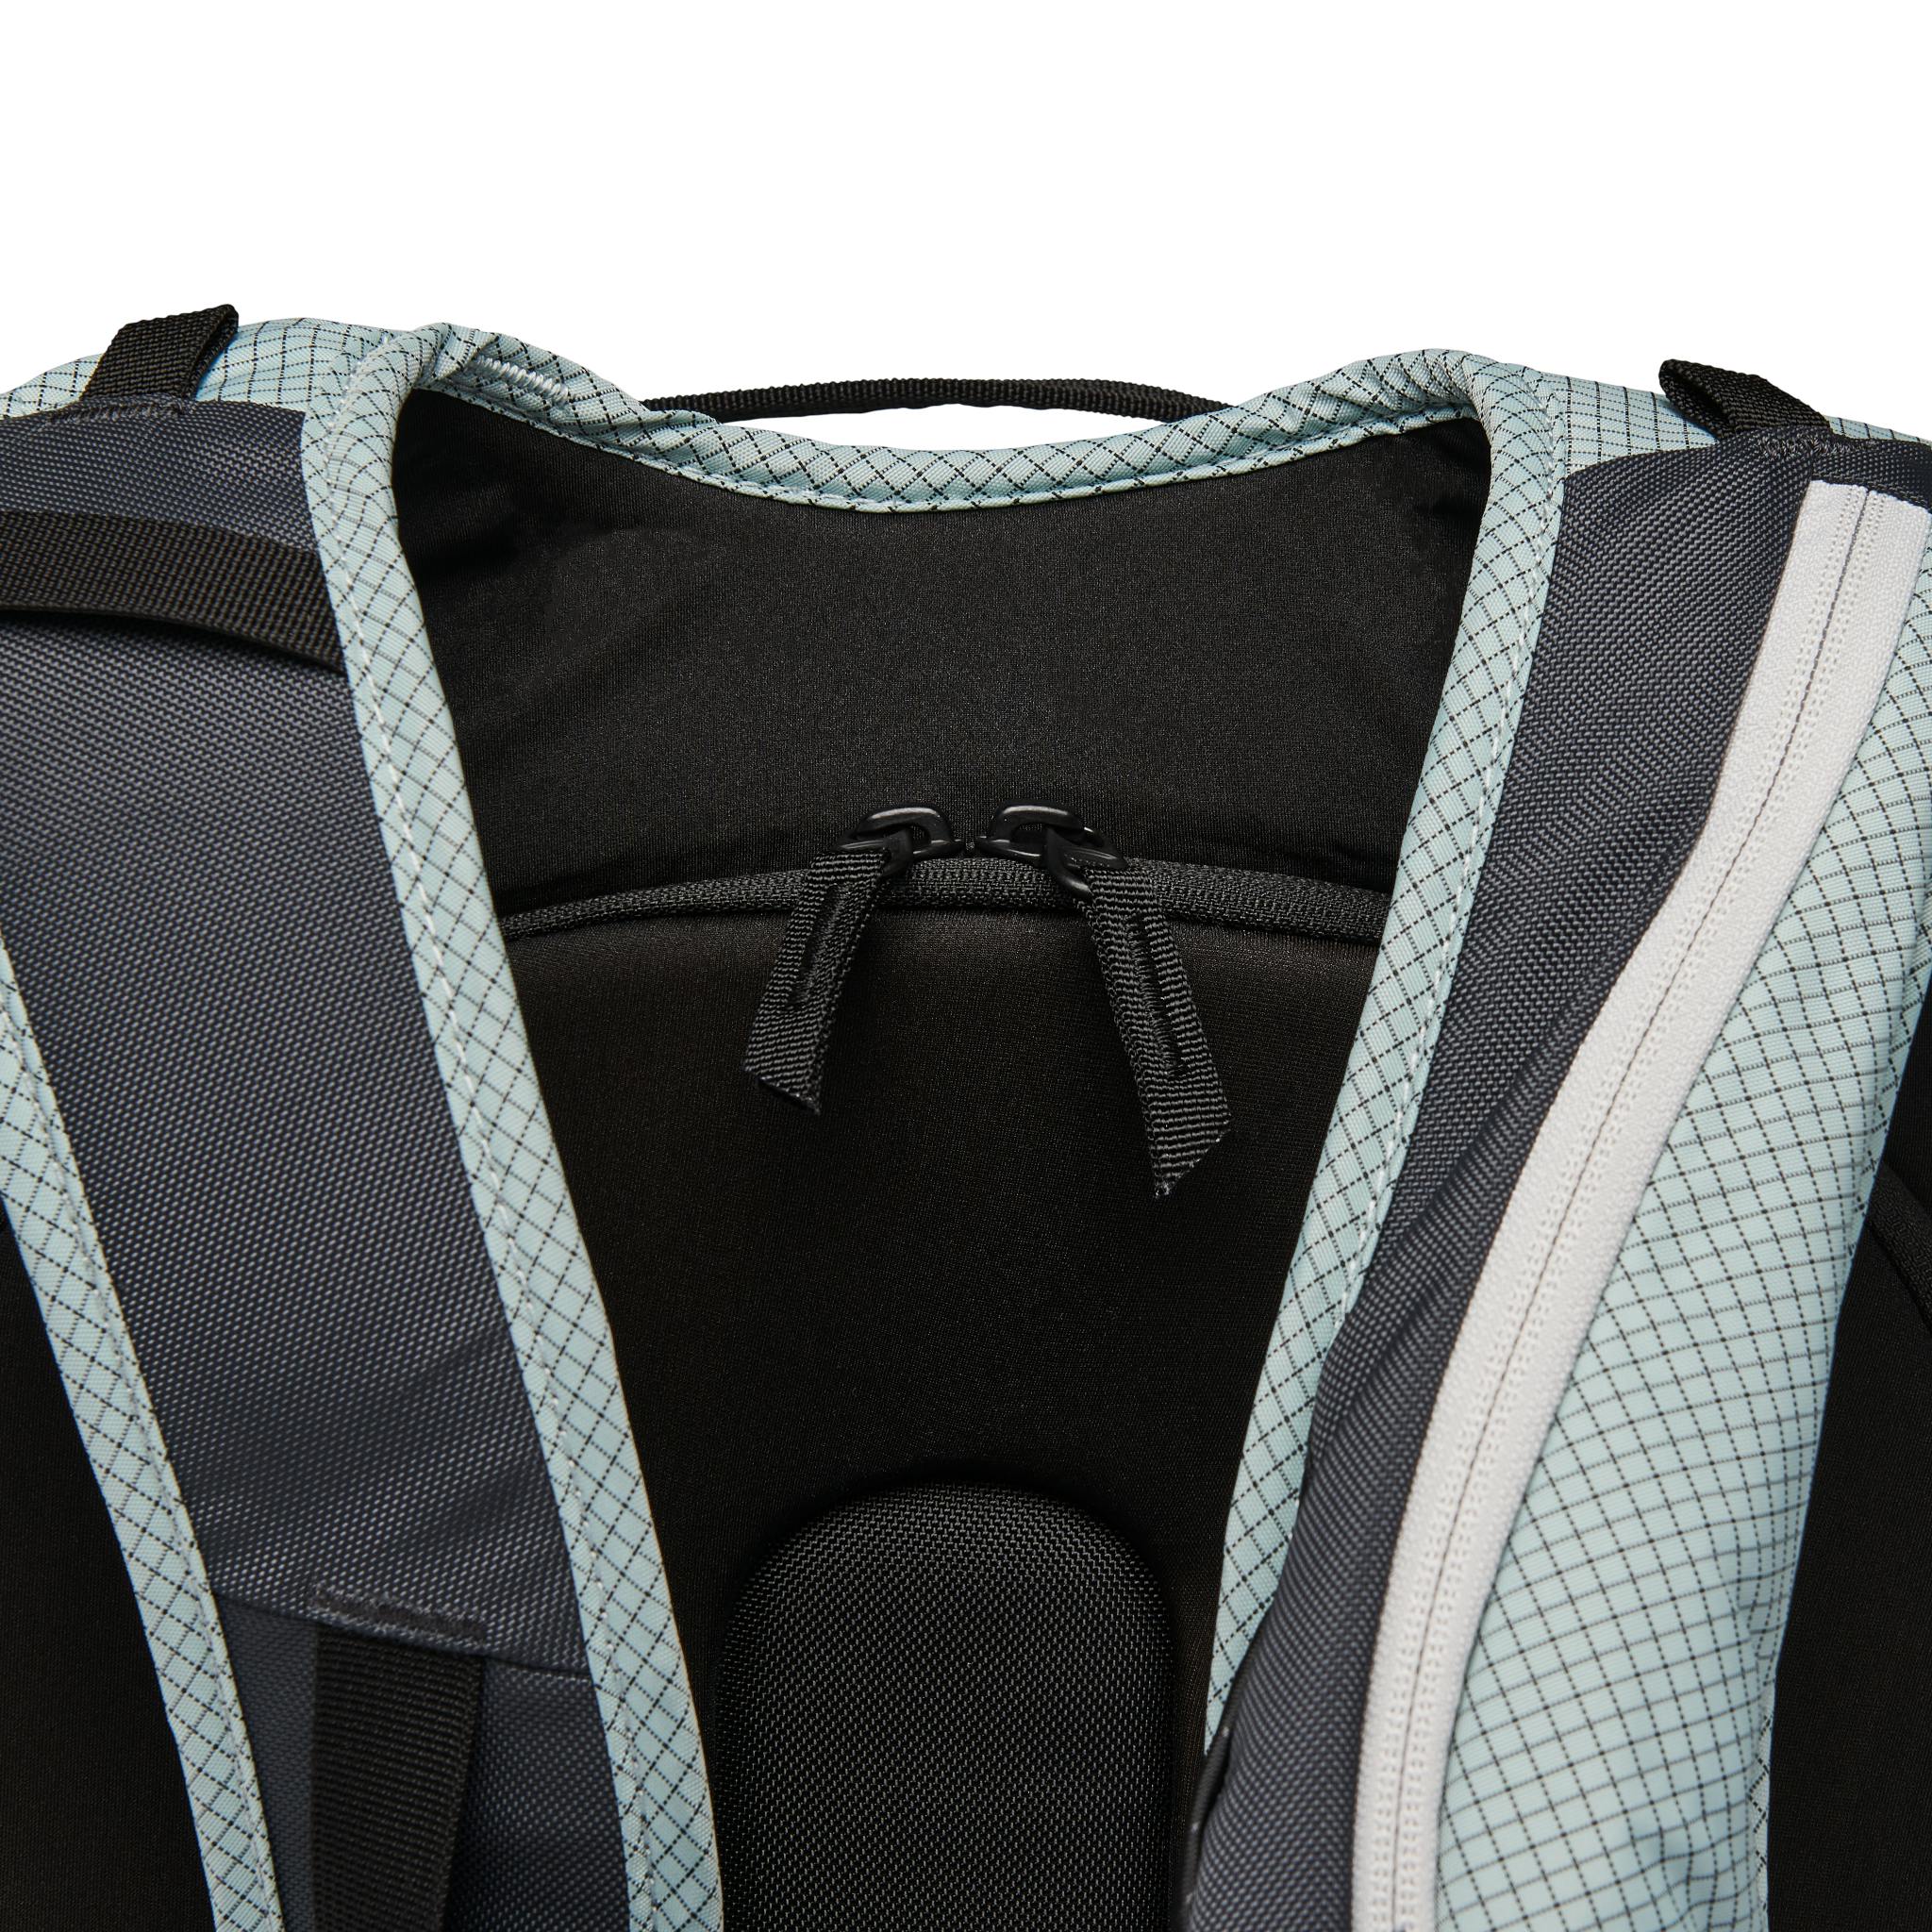 Dawn Patrol 32 Backpack, Zippered Back-Panel Access